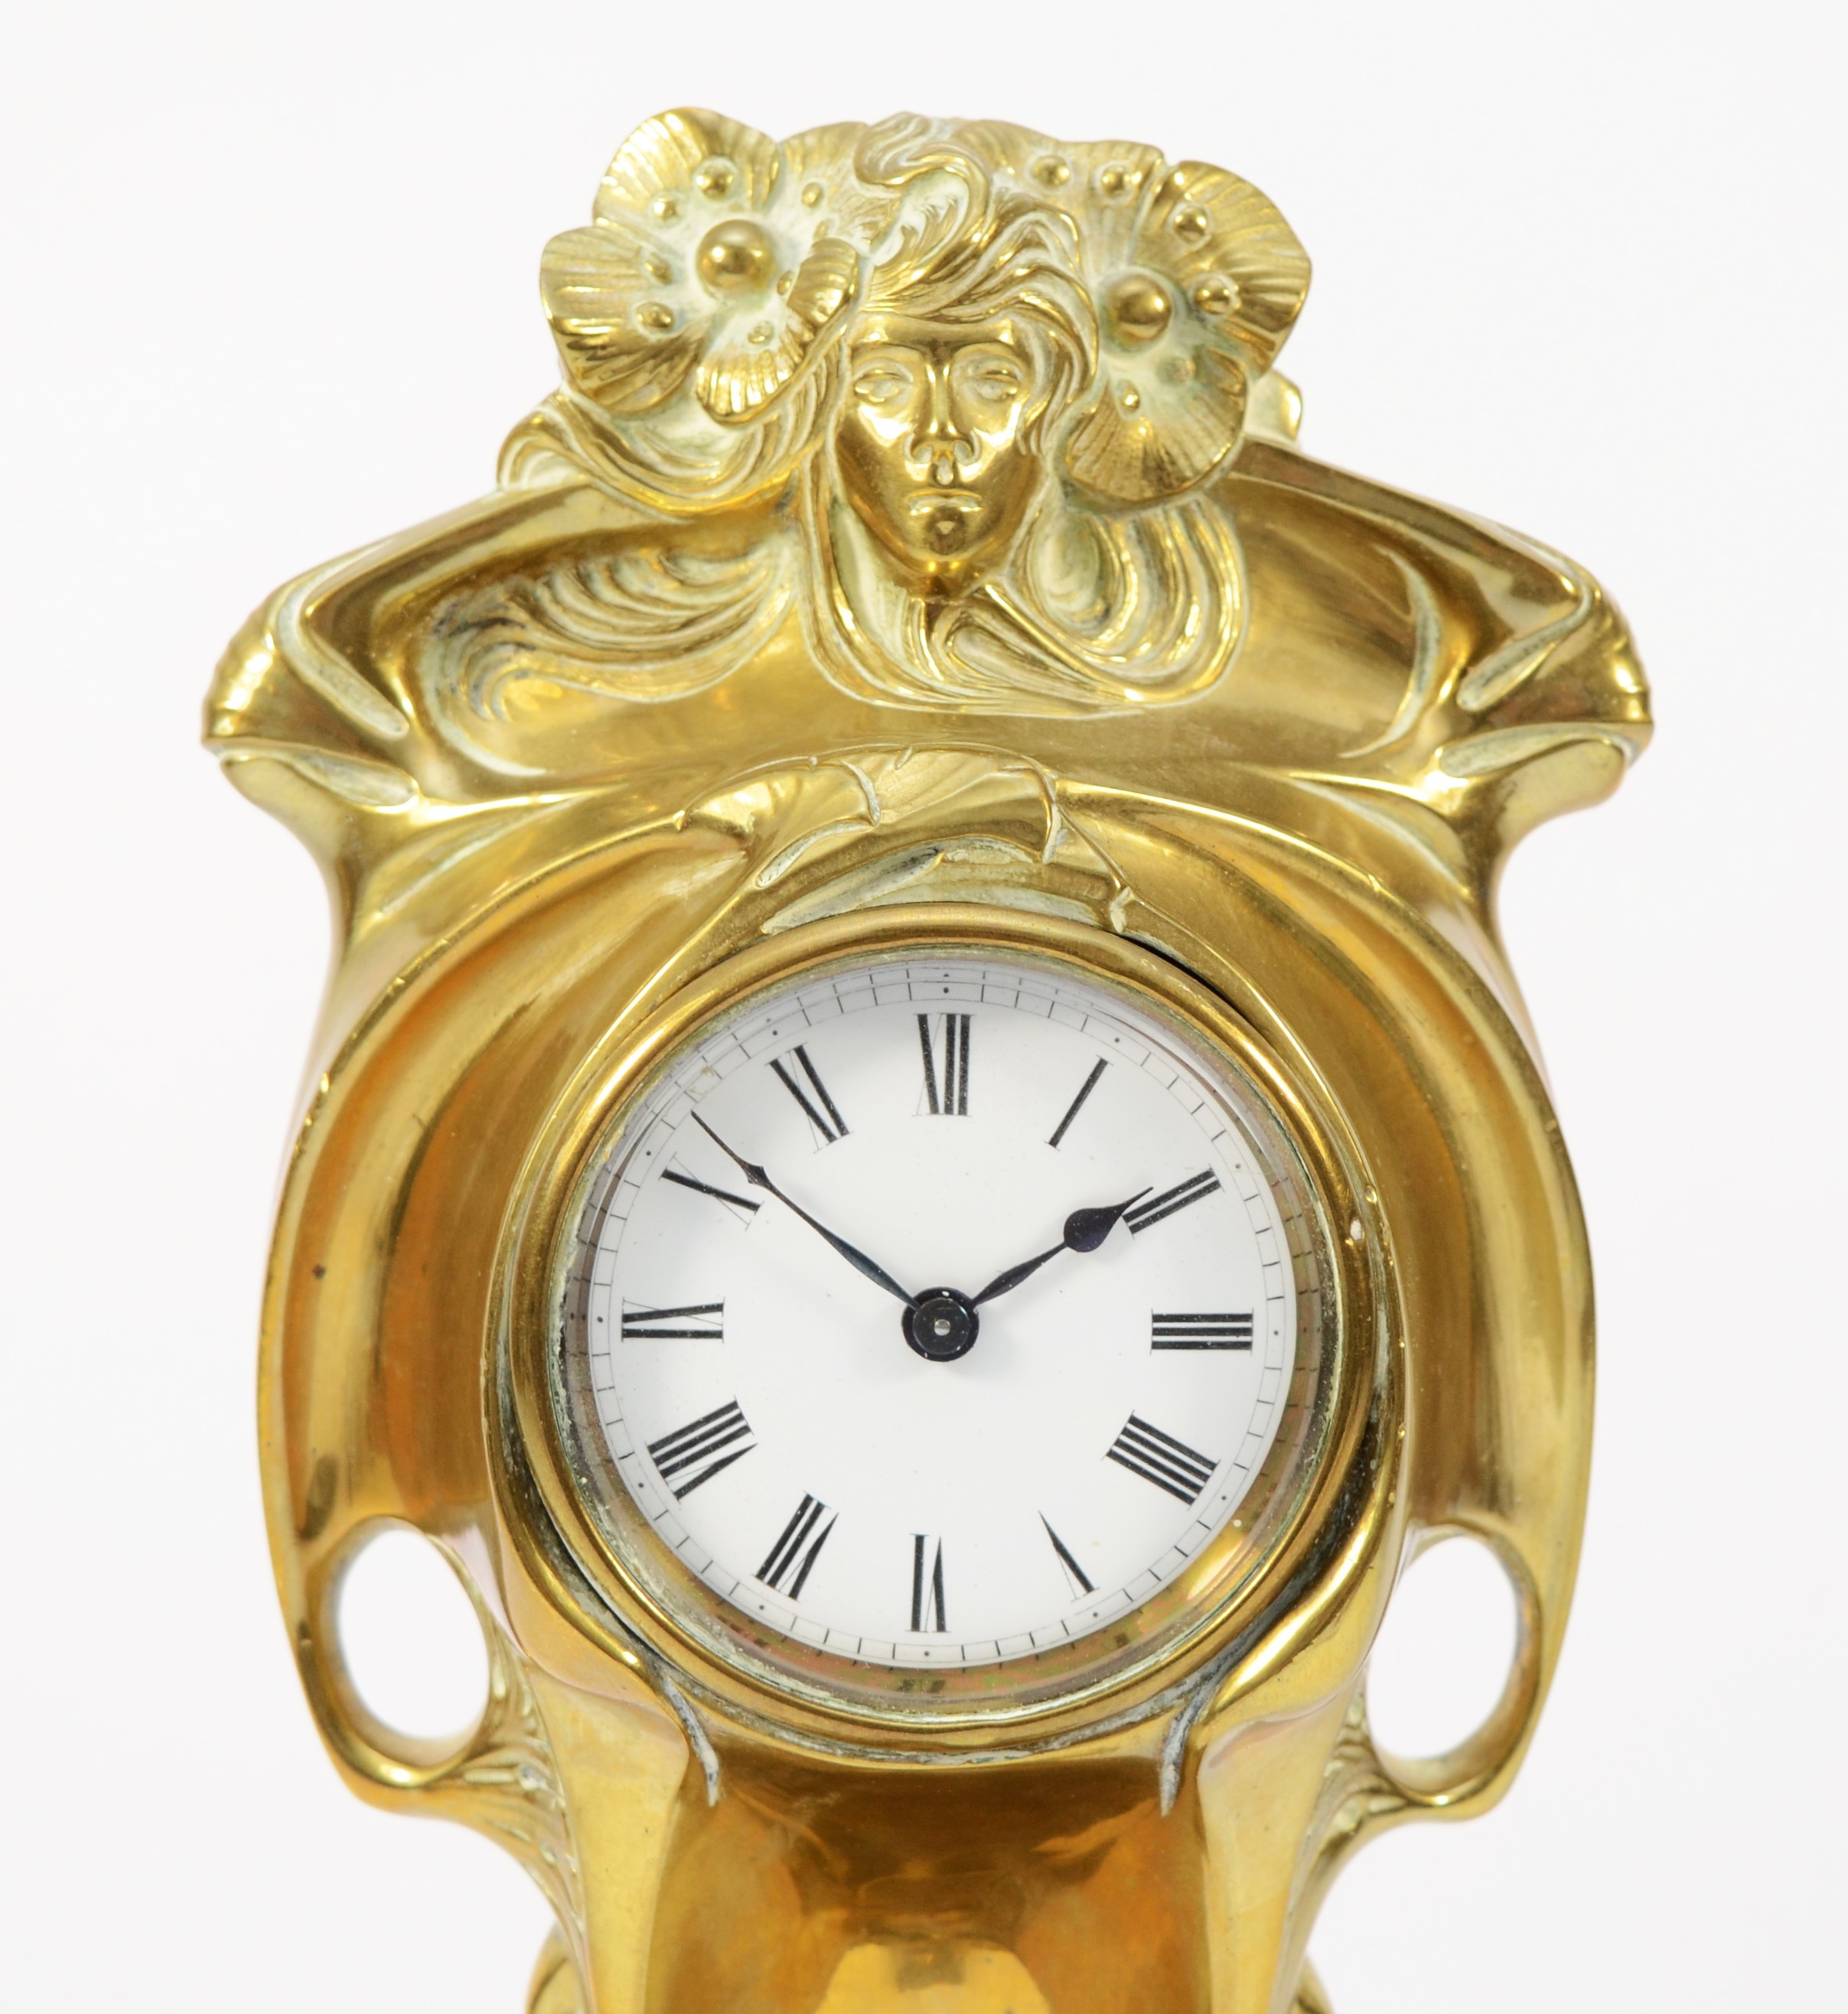 An Art Nouveau gilt brass 8 day mantel clock, in the form of a cloaked female figure holding a - Image 2 of 6